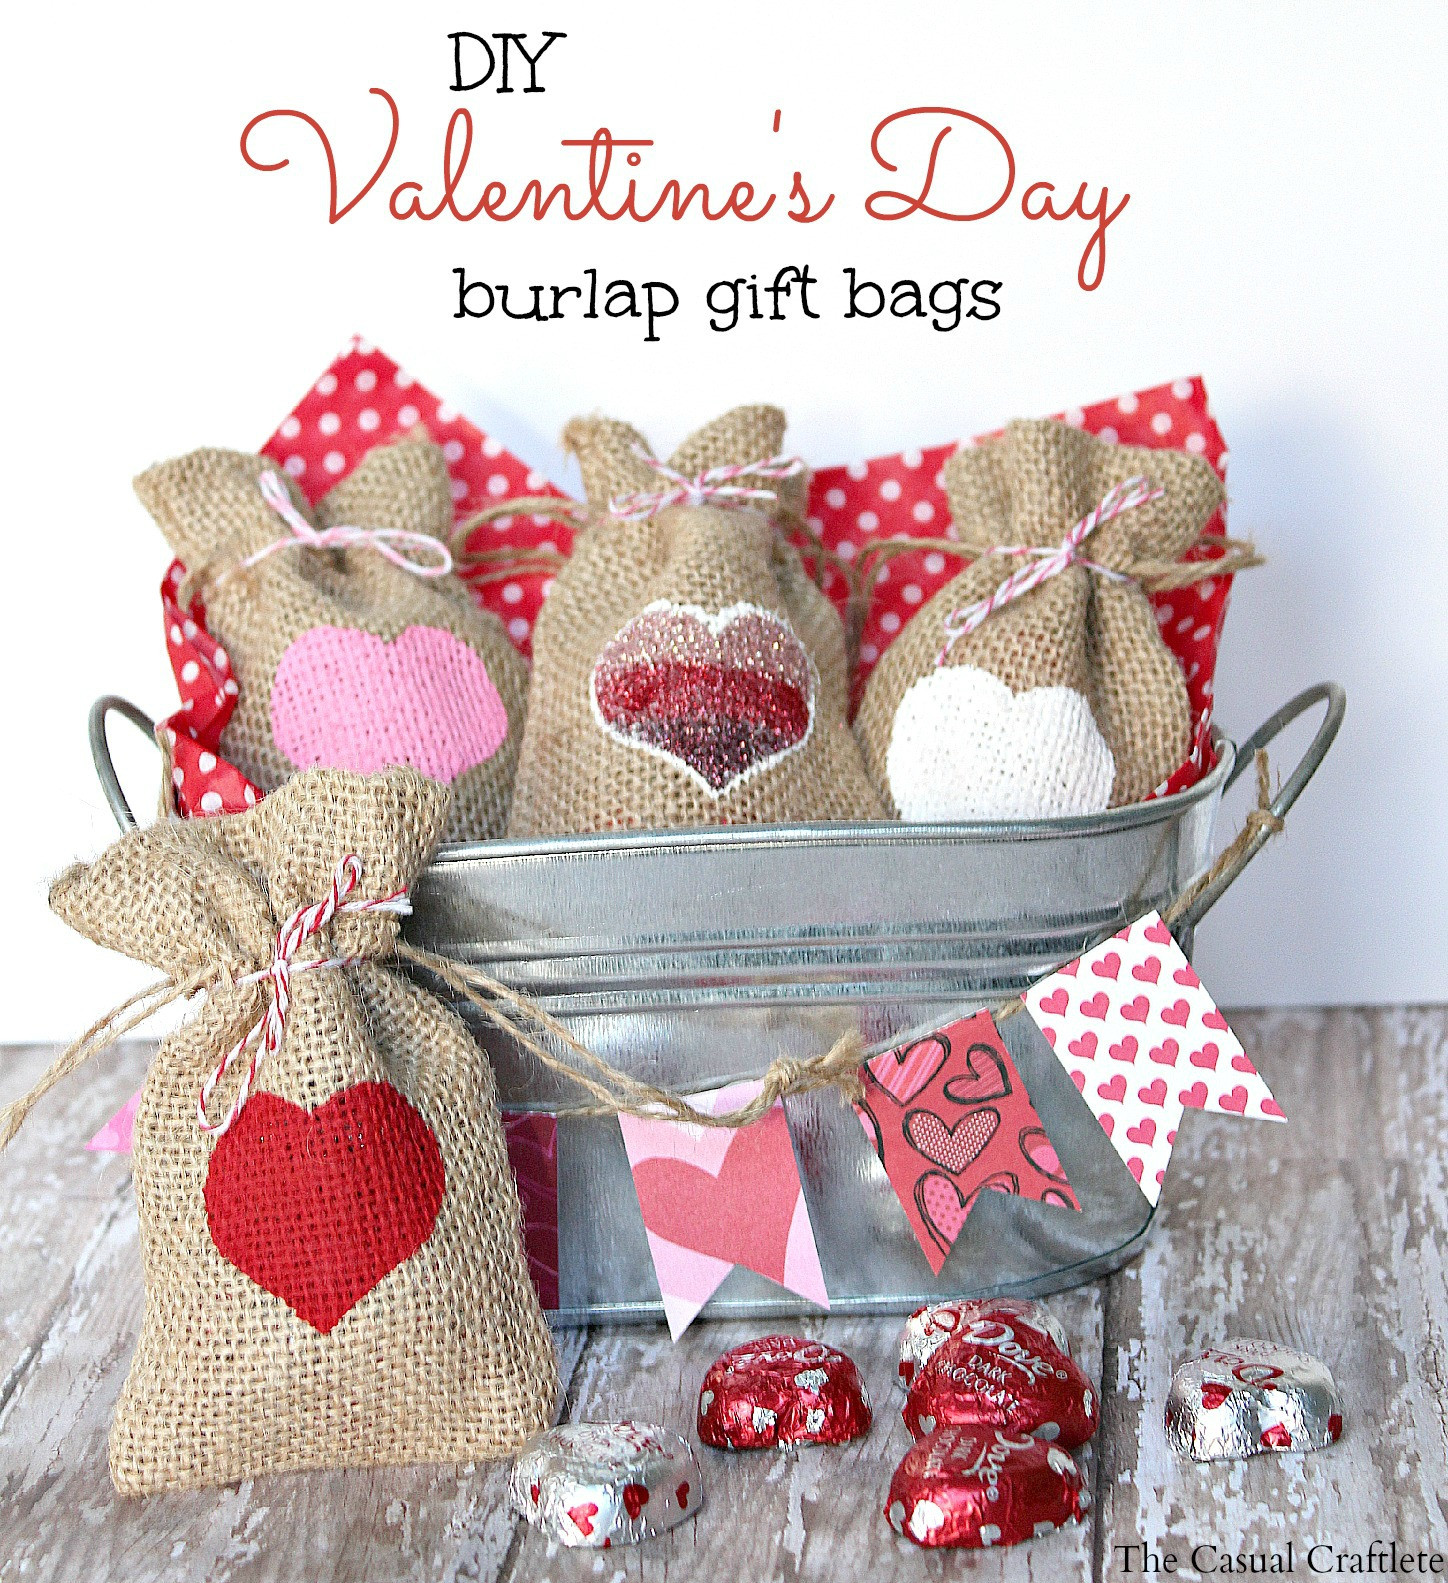 Valentines Day Ideas Gift
 DIY Valentine s Day Burlap Gift Bags